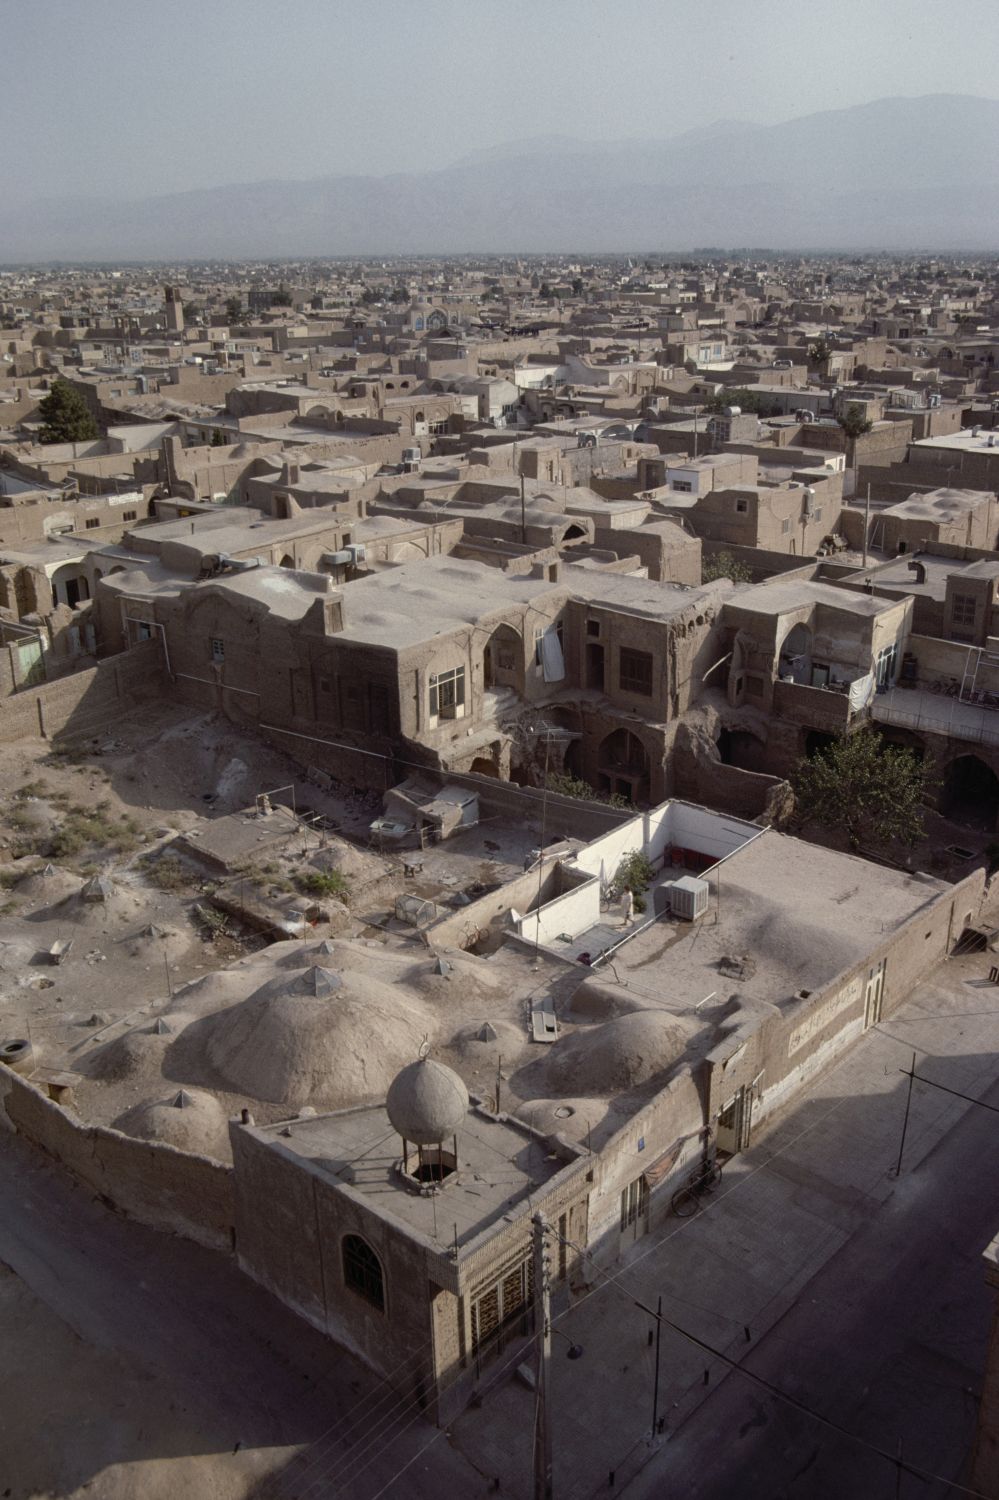 View over city facing east, taken from the minaret of the&nbsp;<a href="https://archnet.org/sites/1628" target="_blank" data-bypass="true">Great Mosque</a>.